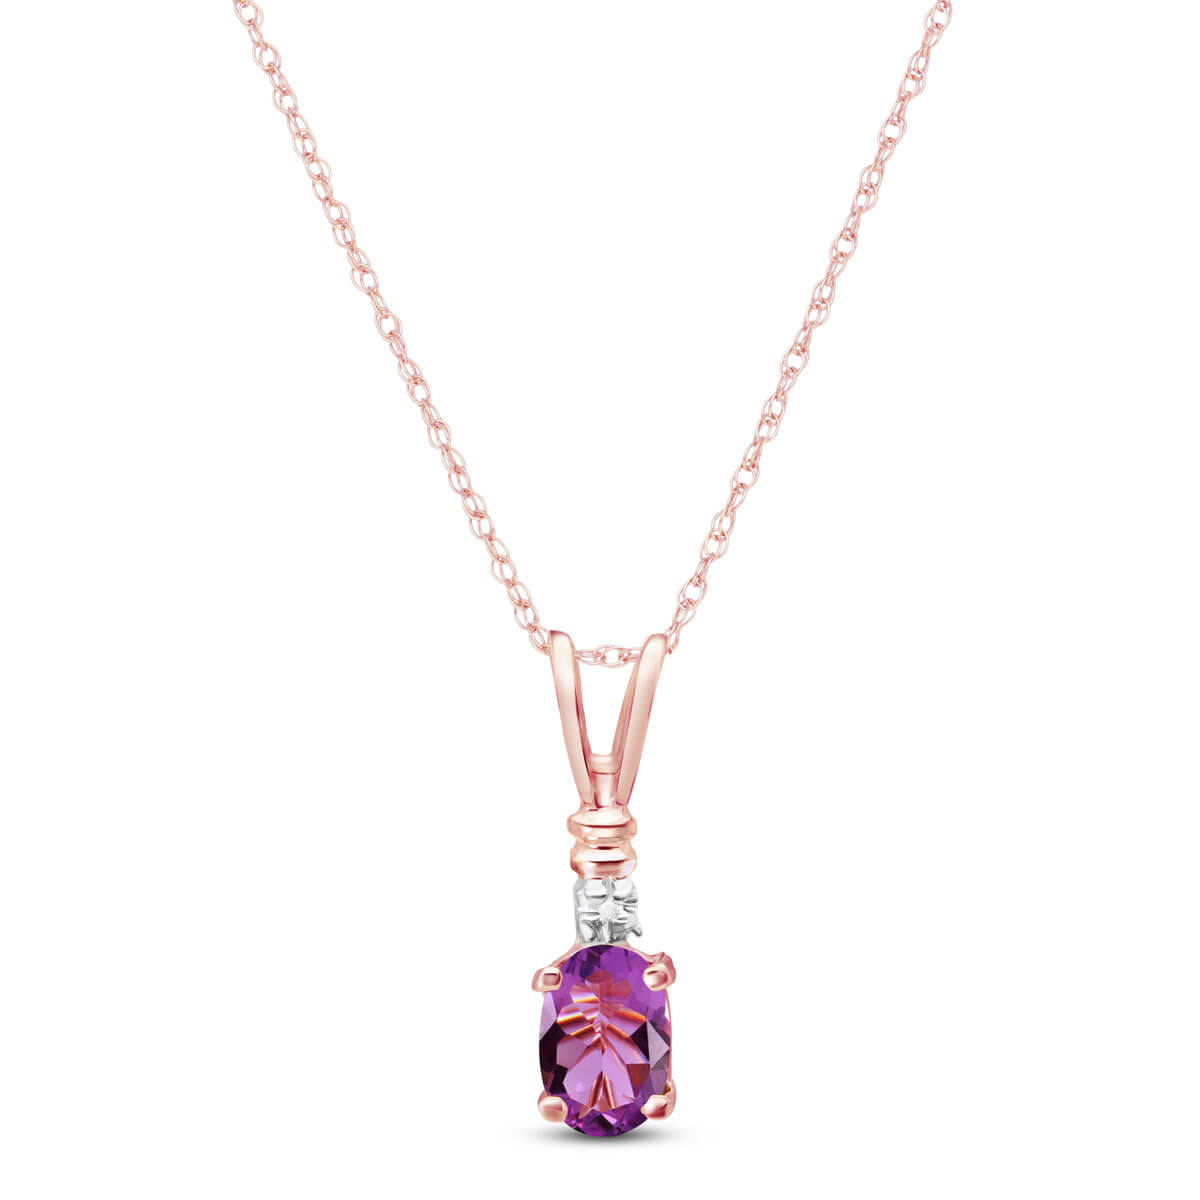 Amethyst & Diamond Cap Oval Pendant Necklace in 9ct Rose Gold